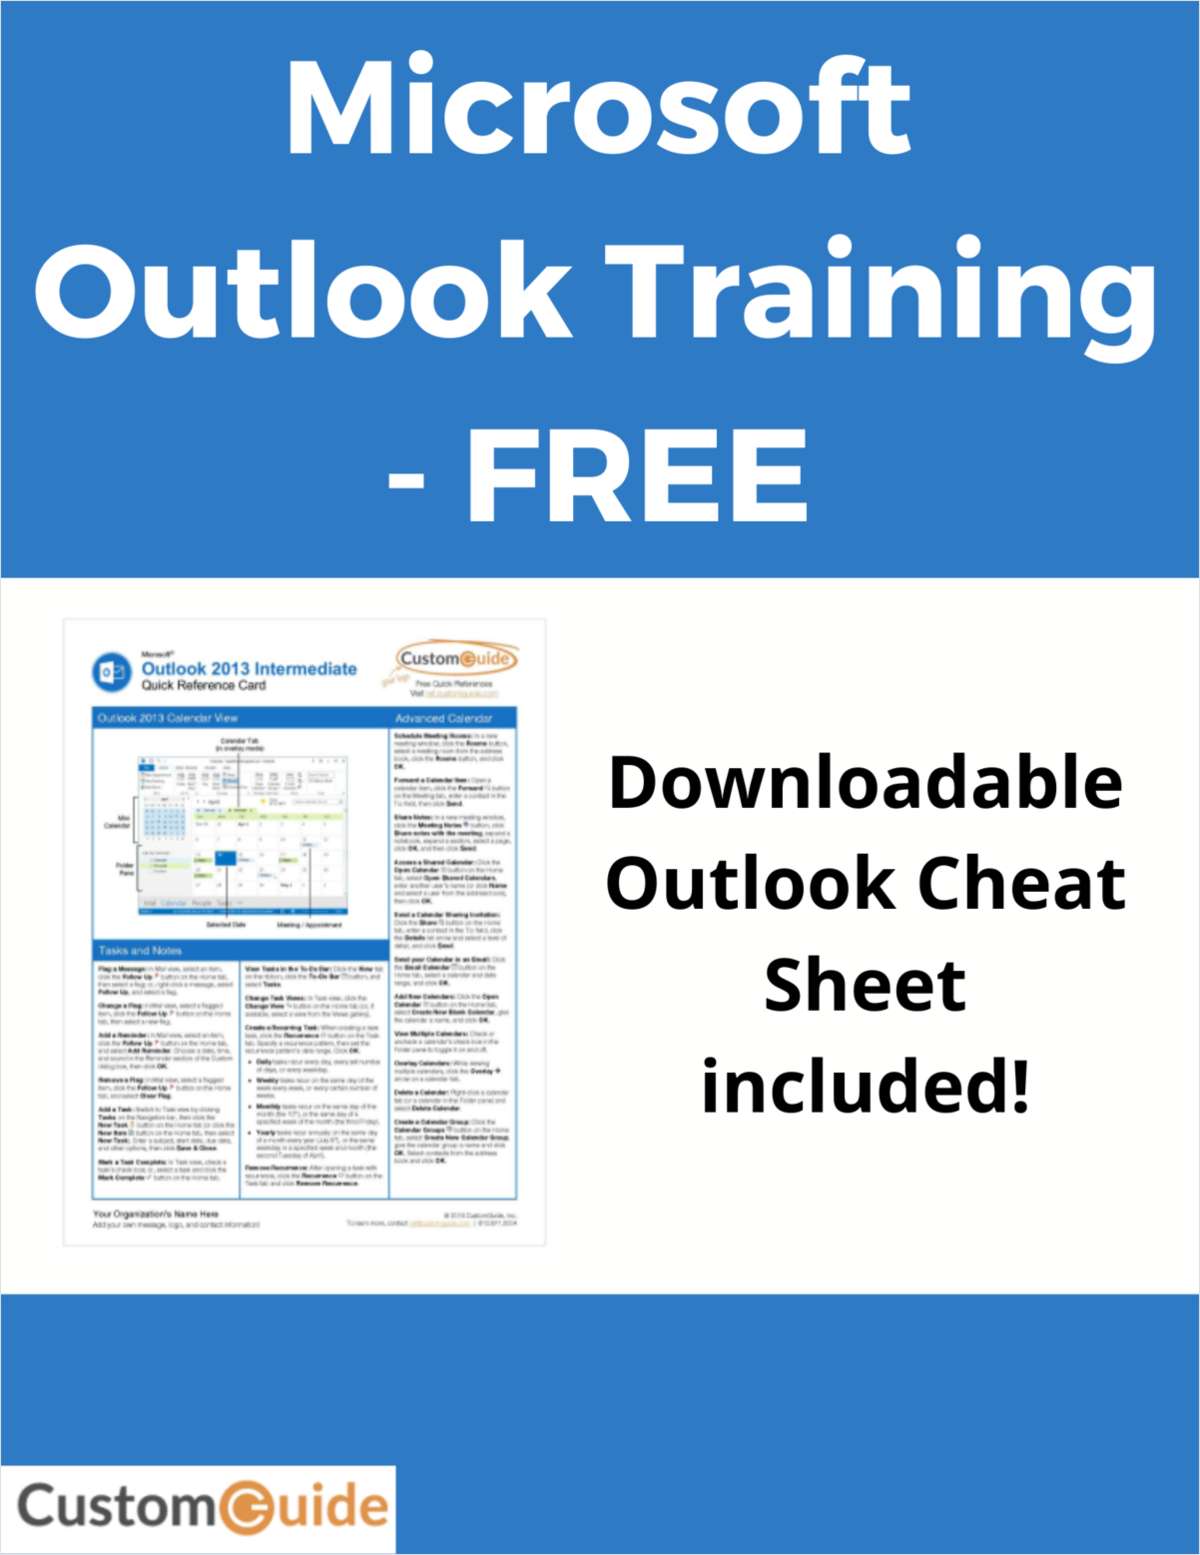 Outlook Training Course - FREE